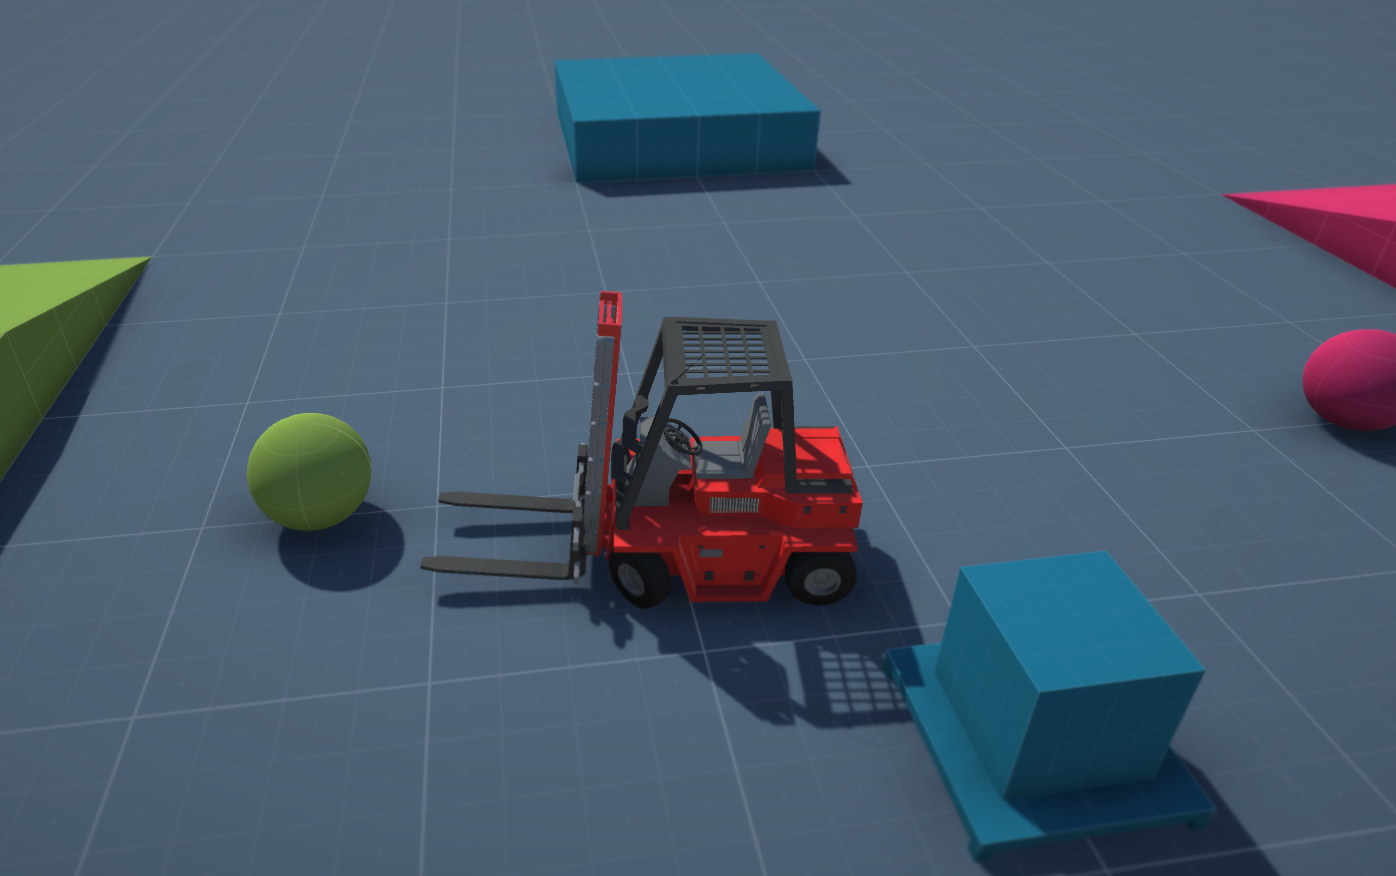 Prototype gamification: A static 3D forklift model becomes an interactive game of skill